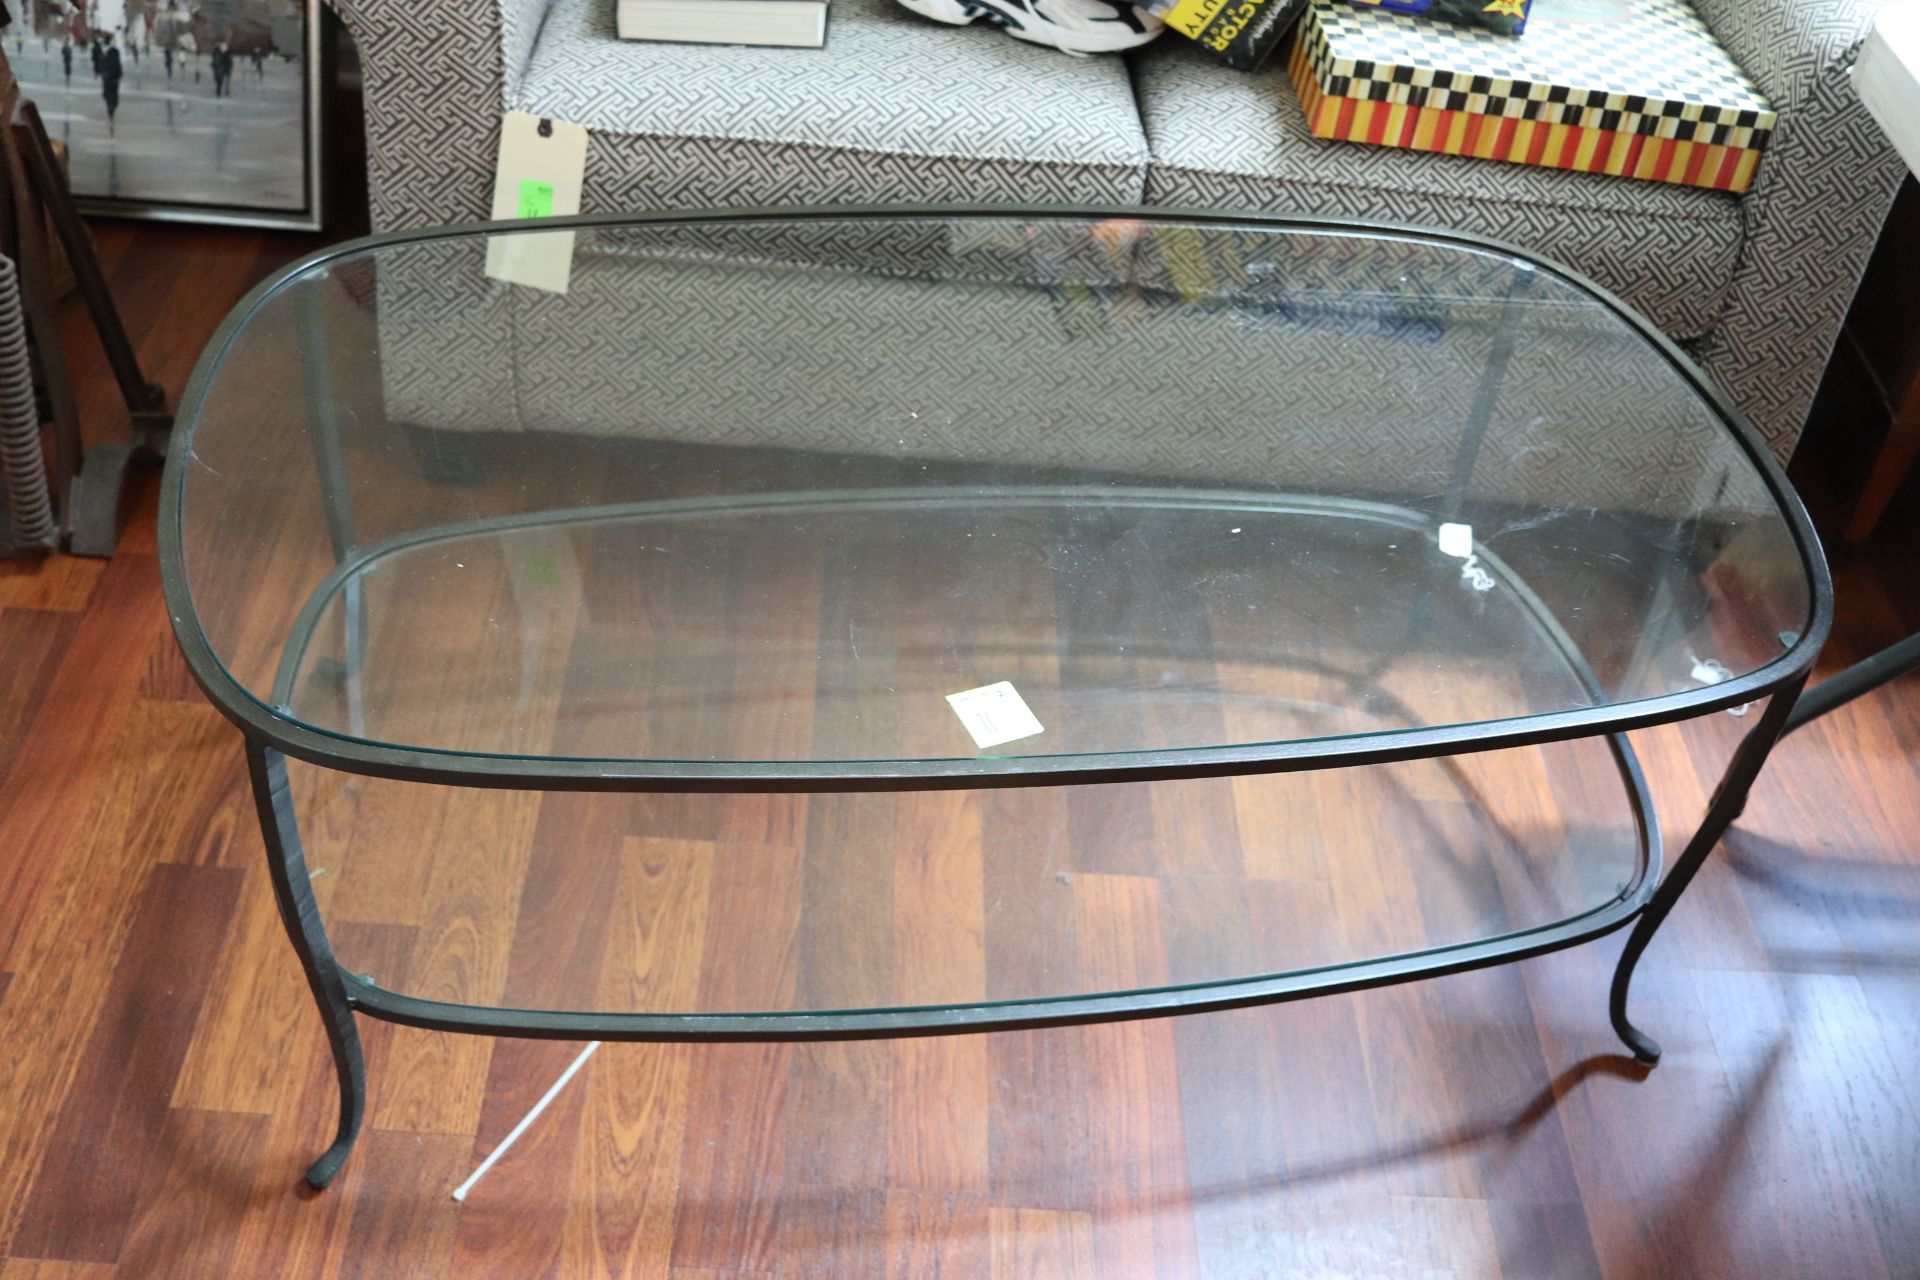 Contemporary glass top coffee table, rectangular glass top over lower glass shelf raised on four leg - Image 3 of 4